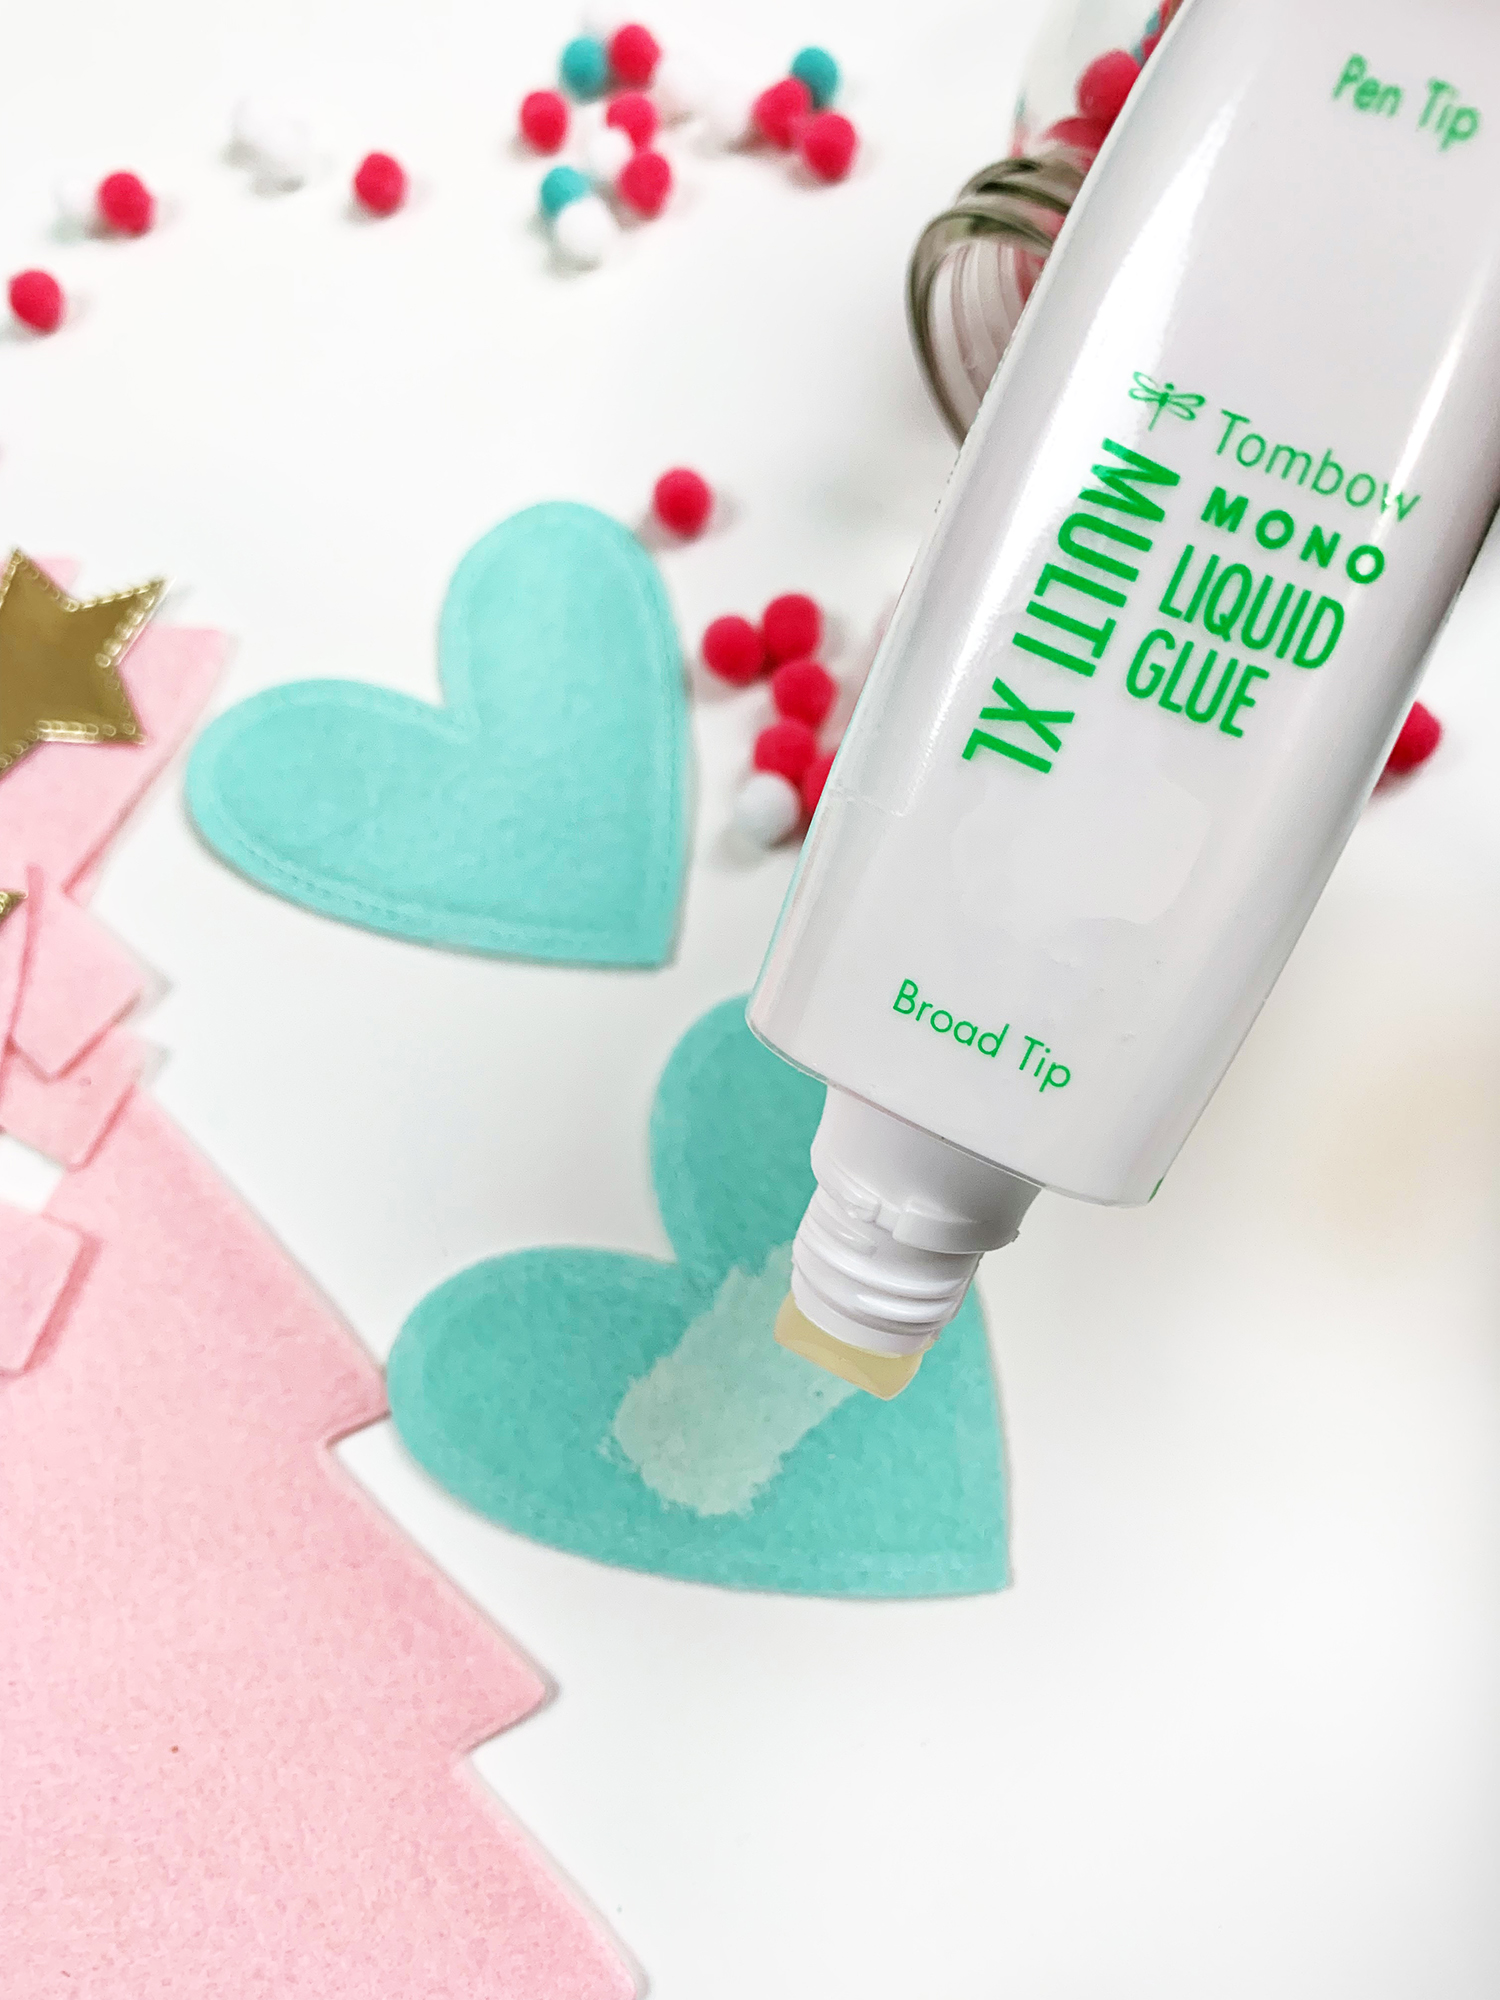 Use the Broad Tip of the Tombow MONO Multi XL Liquid Glue to apply a very light layer of glue to the heart. If you use too much glue it will bleed through the felt. A little bit works! #tombow #diy 